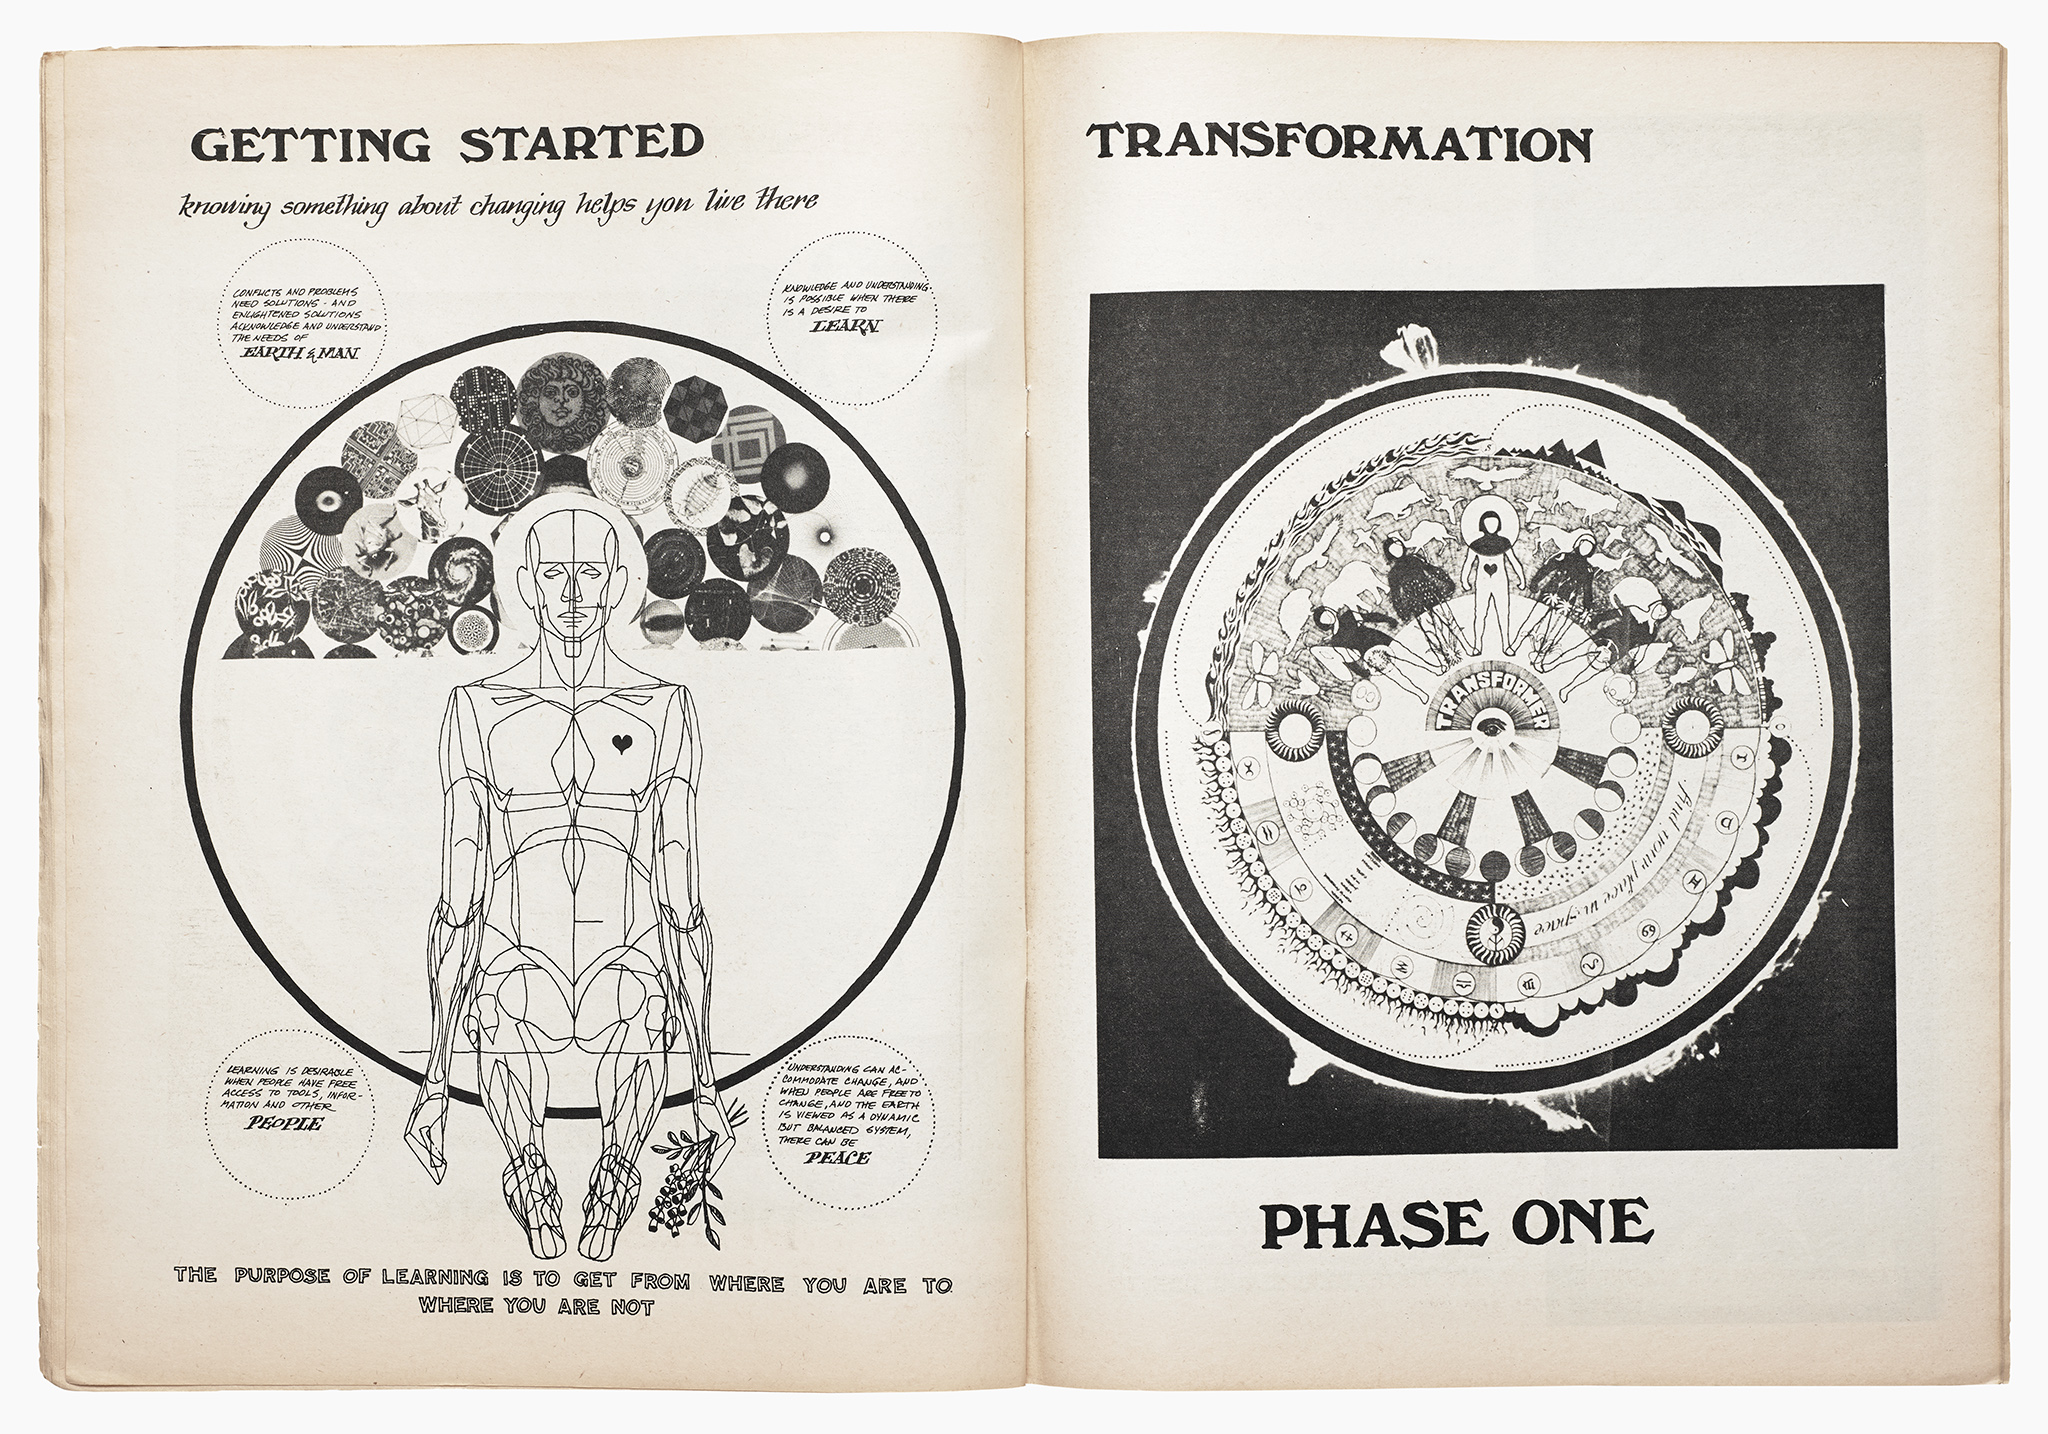 Images from the July 1970 Whole Earth Catalog